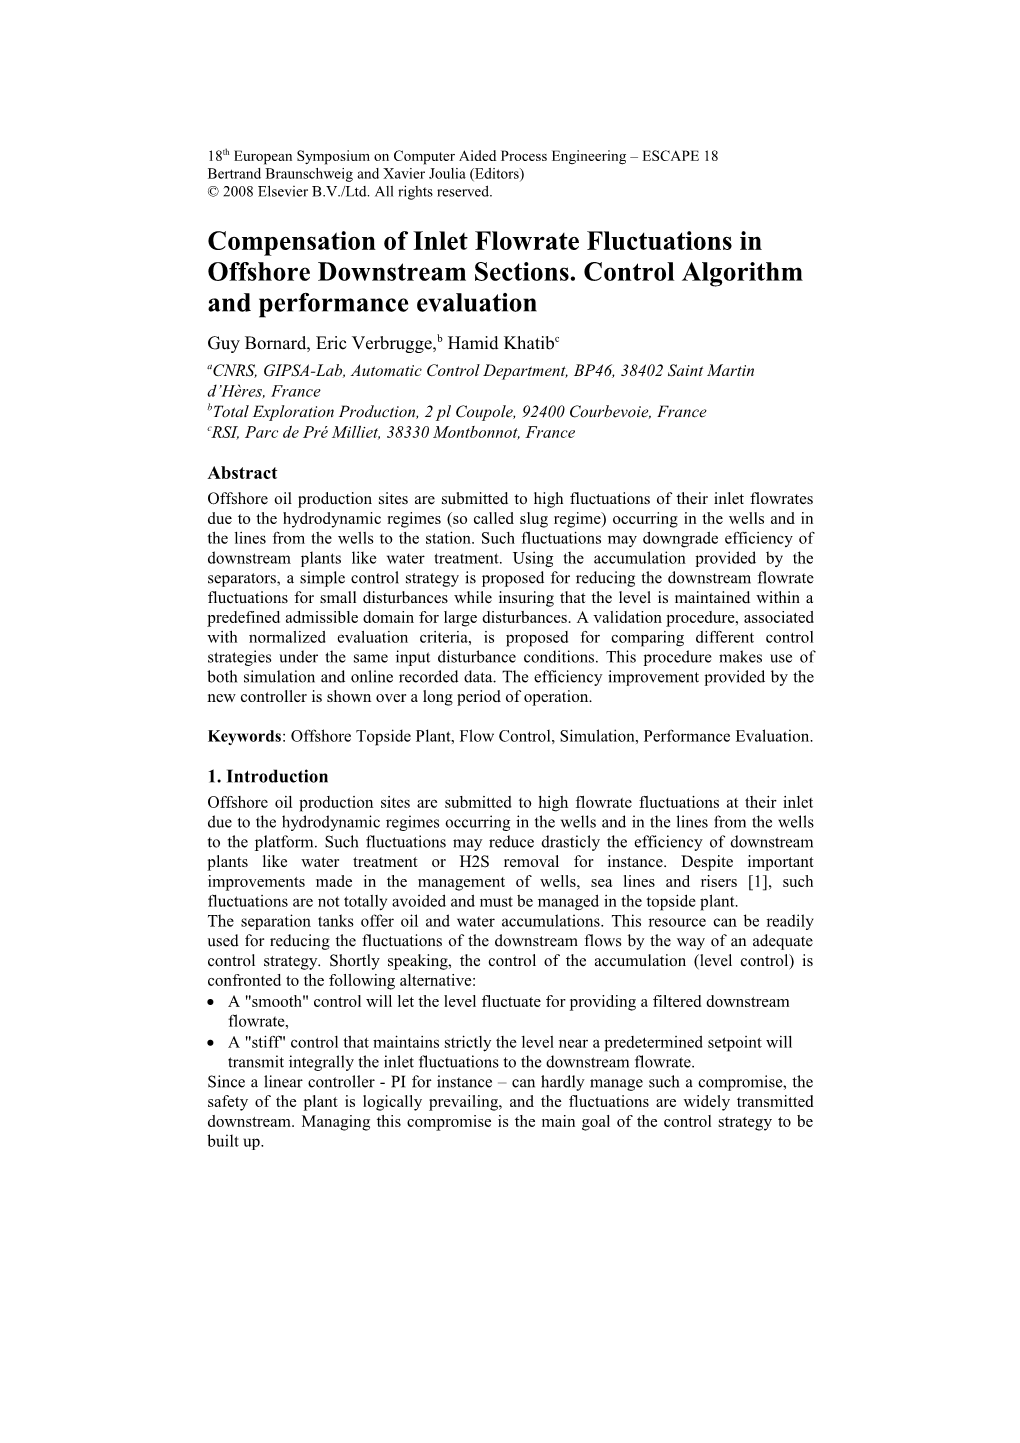 Compensation of Inlet Flowrate Fluctuations in Ofshore Downstream Sections 1